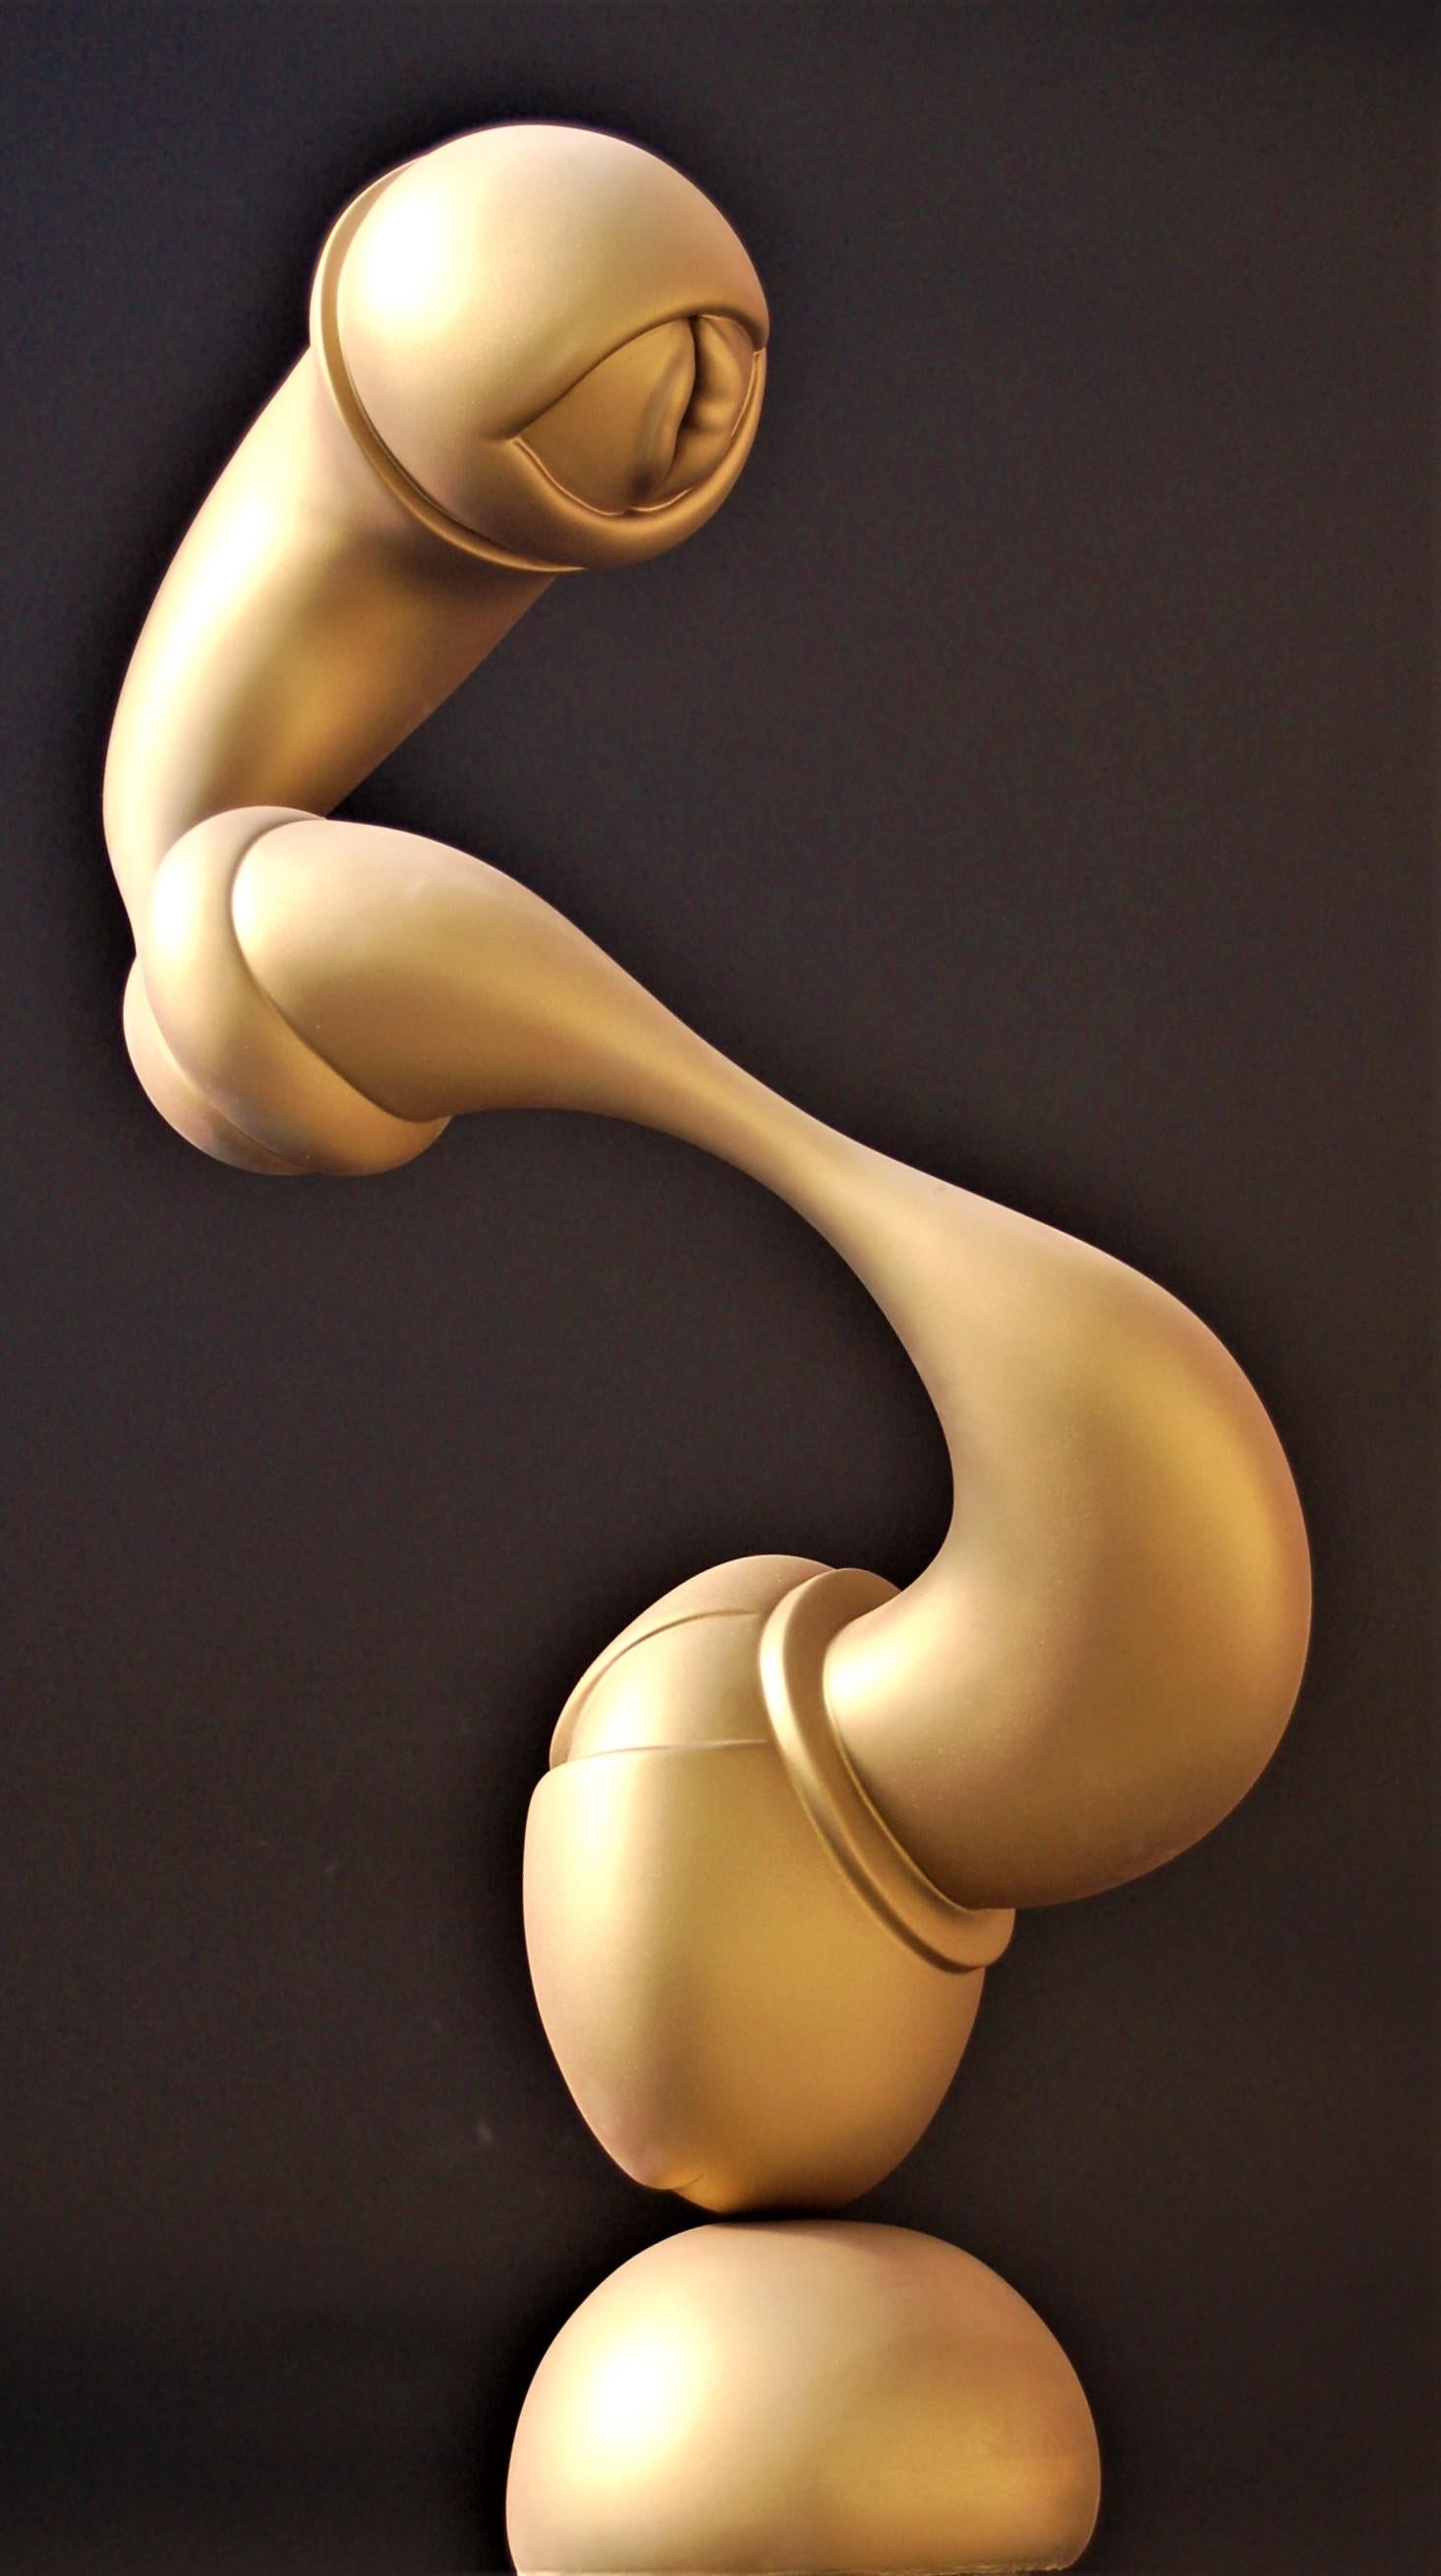 Call Me Sometimes - Contemporary Sculpture by Don Frost